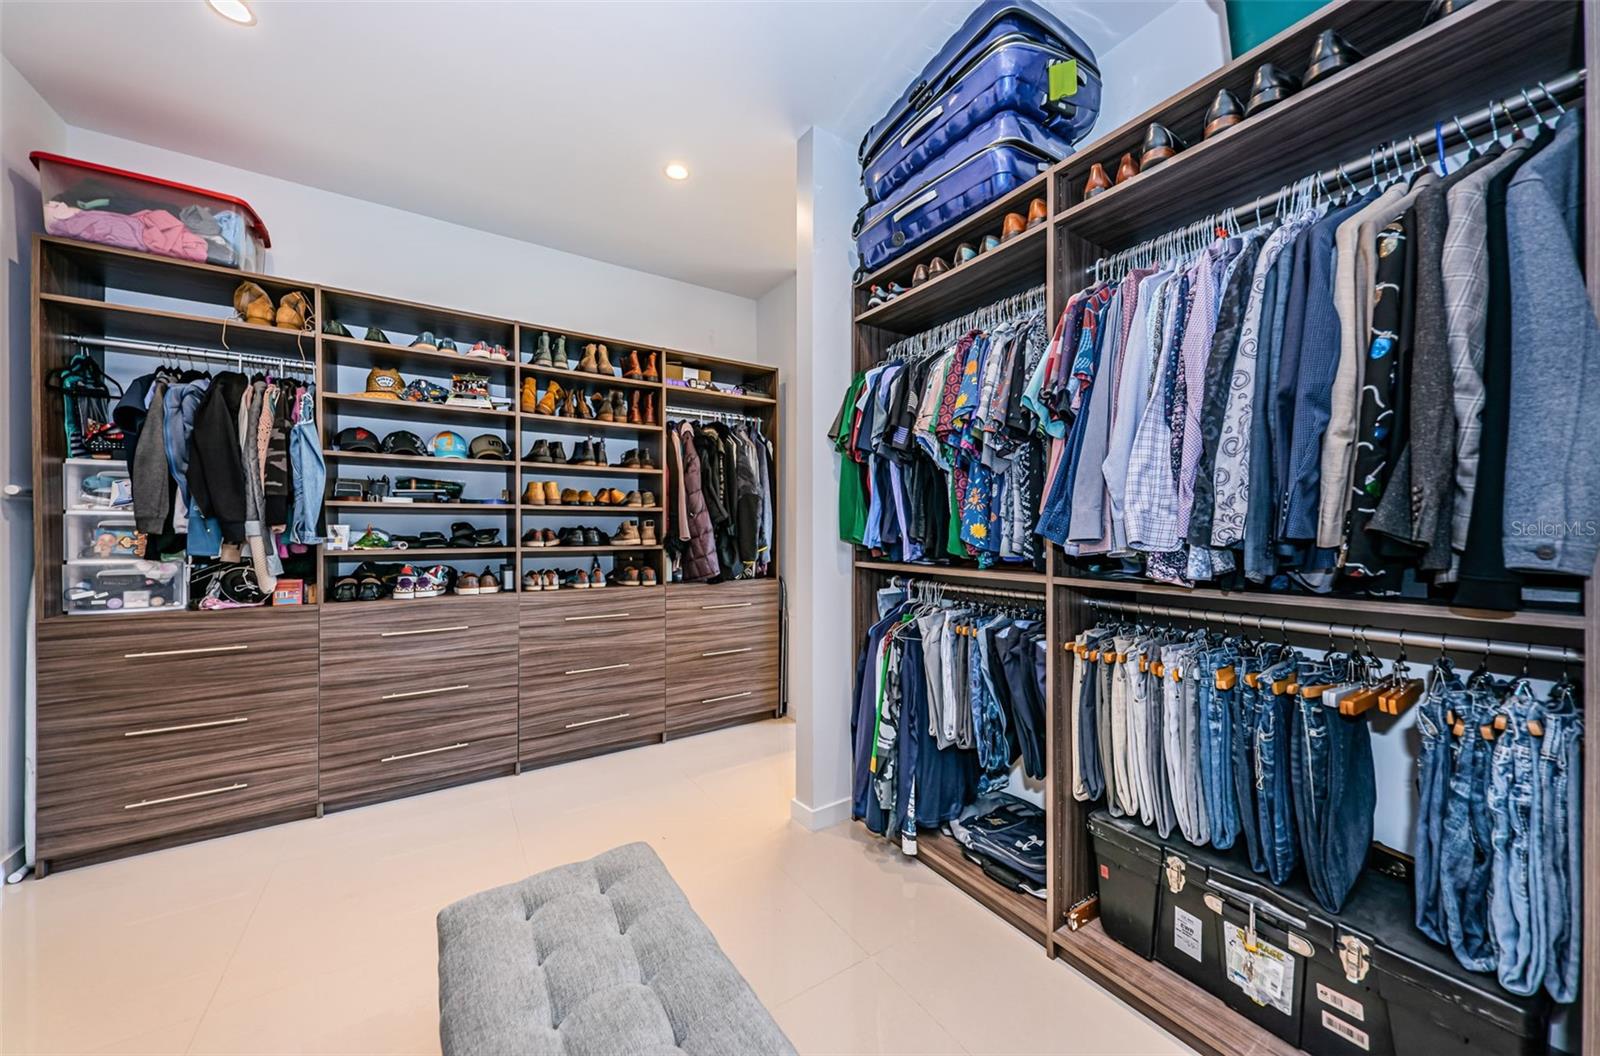 Unbelievable walk-in closet with a separate laundry room and additional storage!